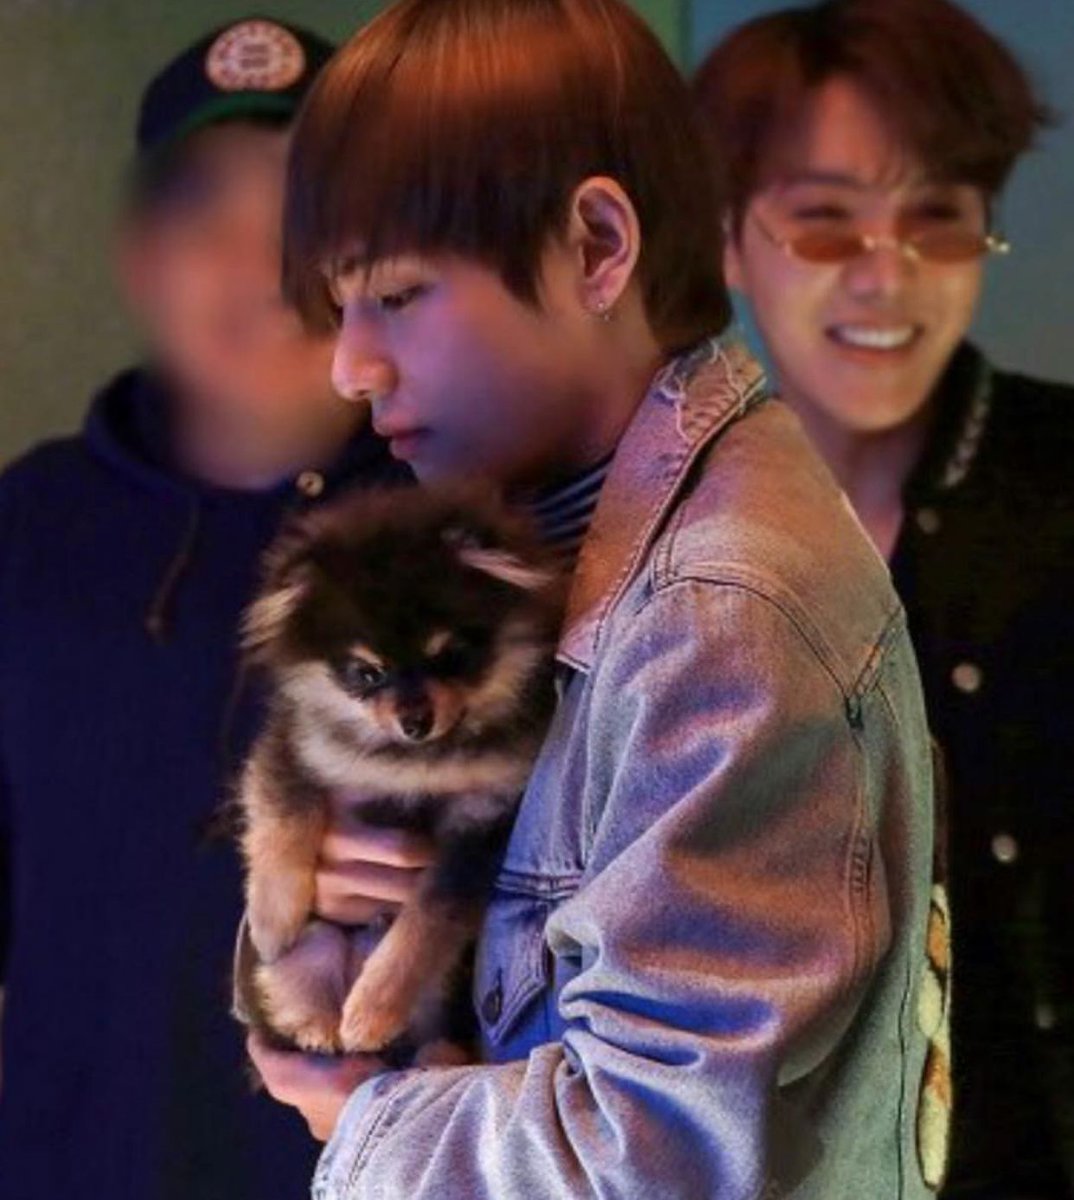 he brings tannie to bts schedules and pampers him to the max